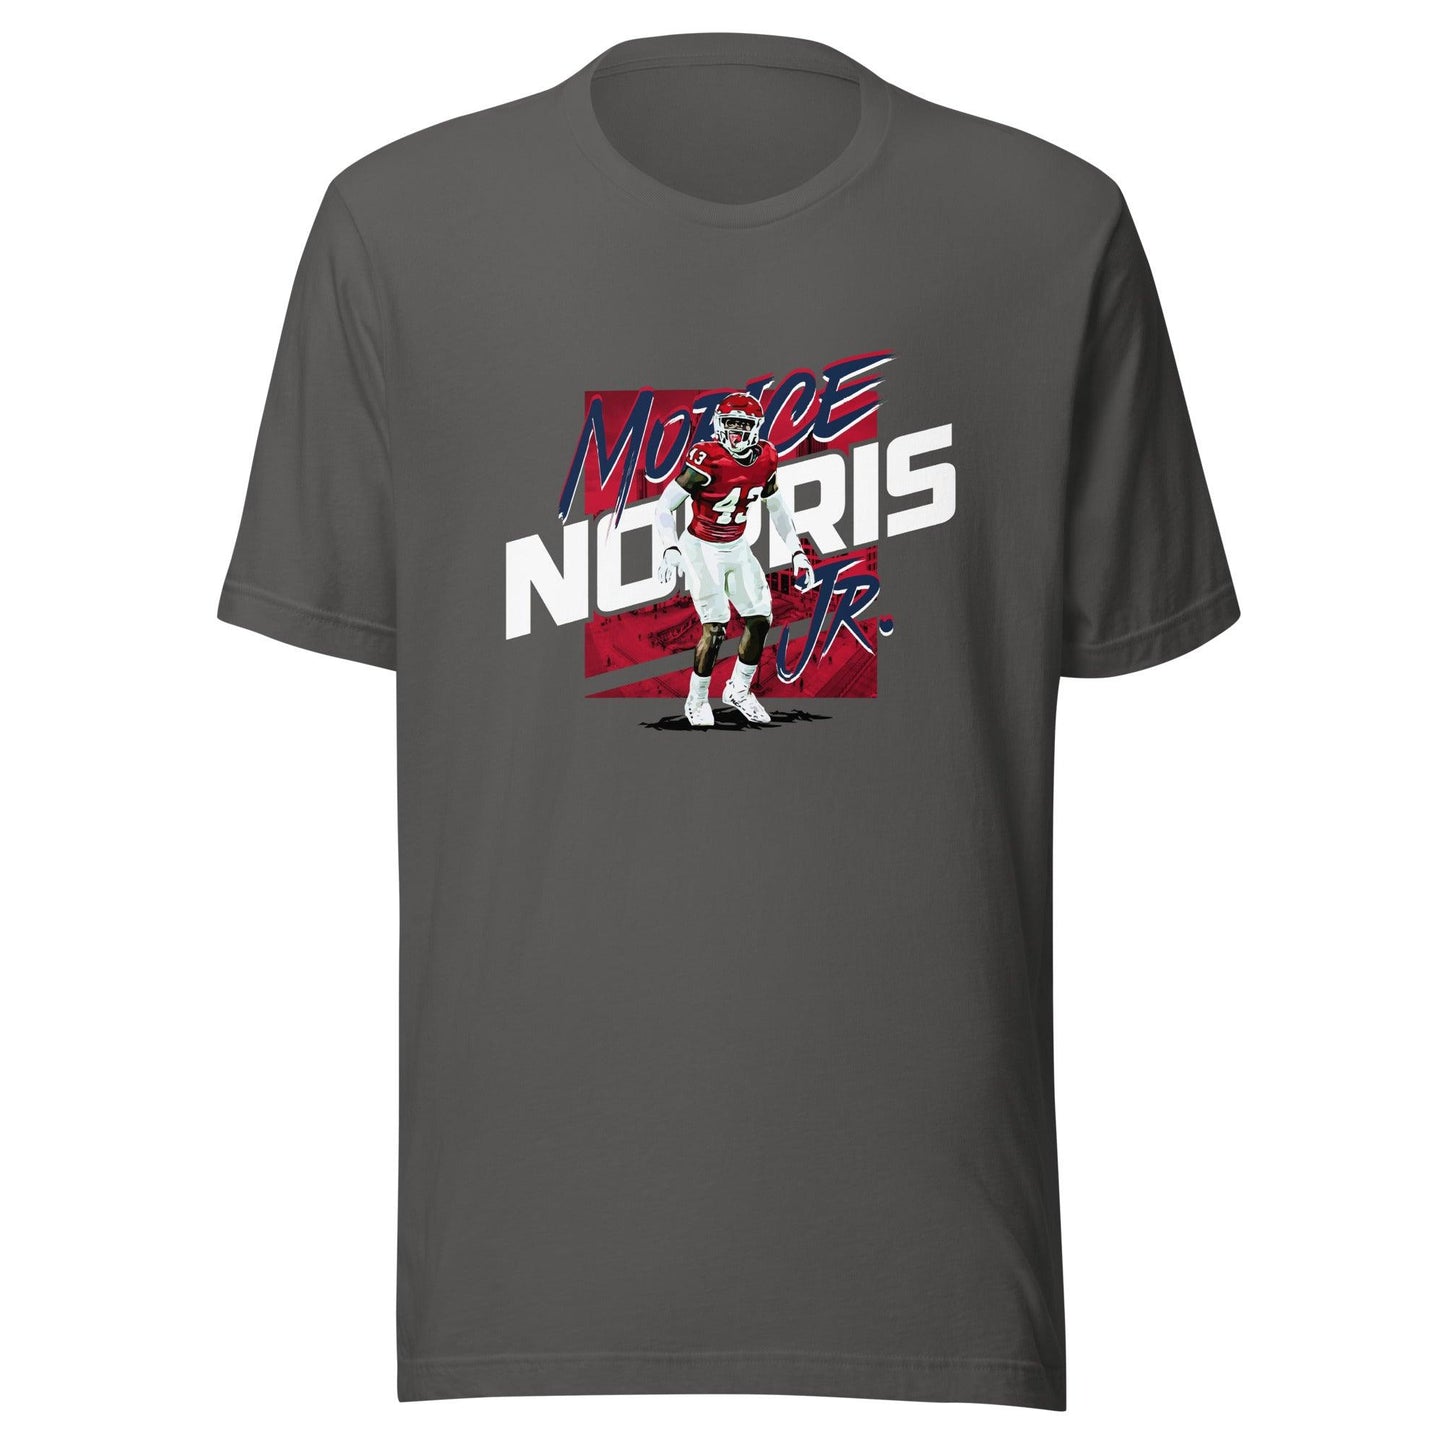 Morice Norris "Gameday" t-shirt - Fan Arch